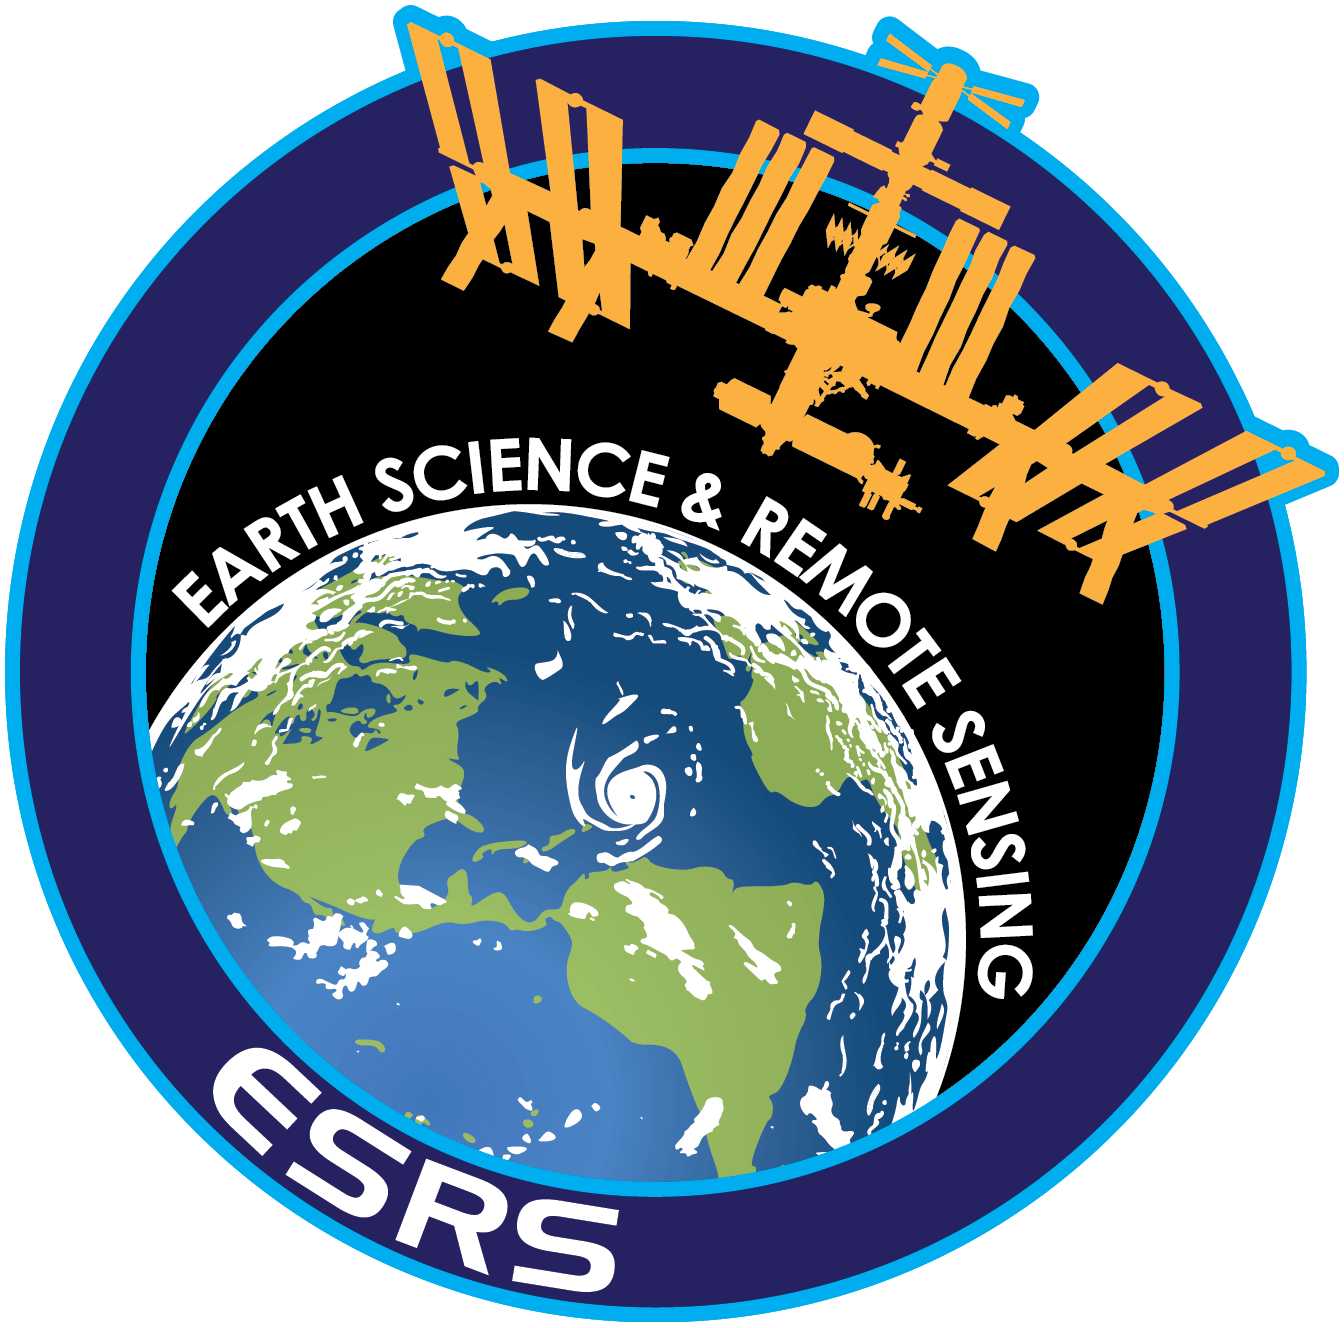 Earth Science Logo - File:Earth Science and Remote Sensing Unit logo.png - Wikimedia Commons